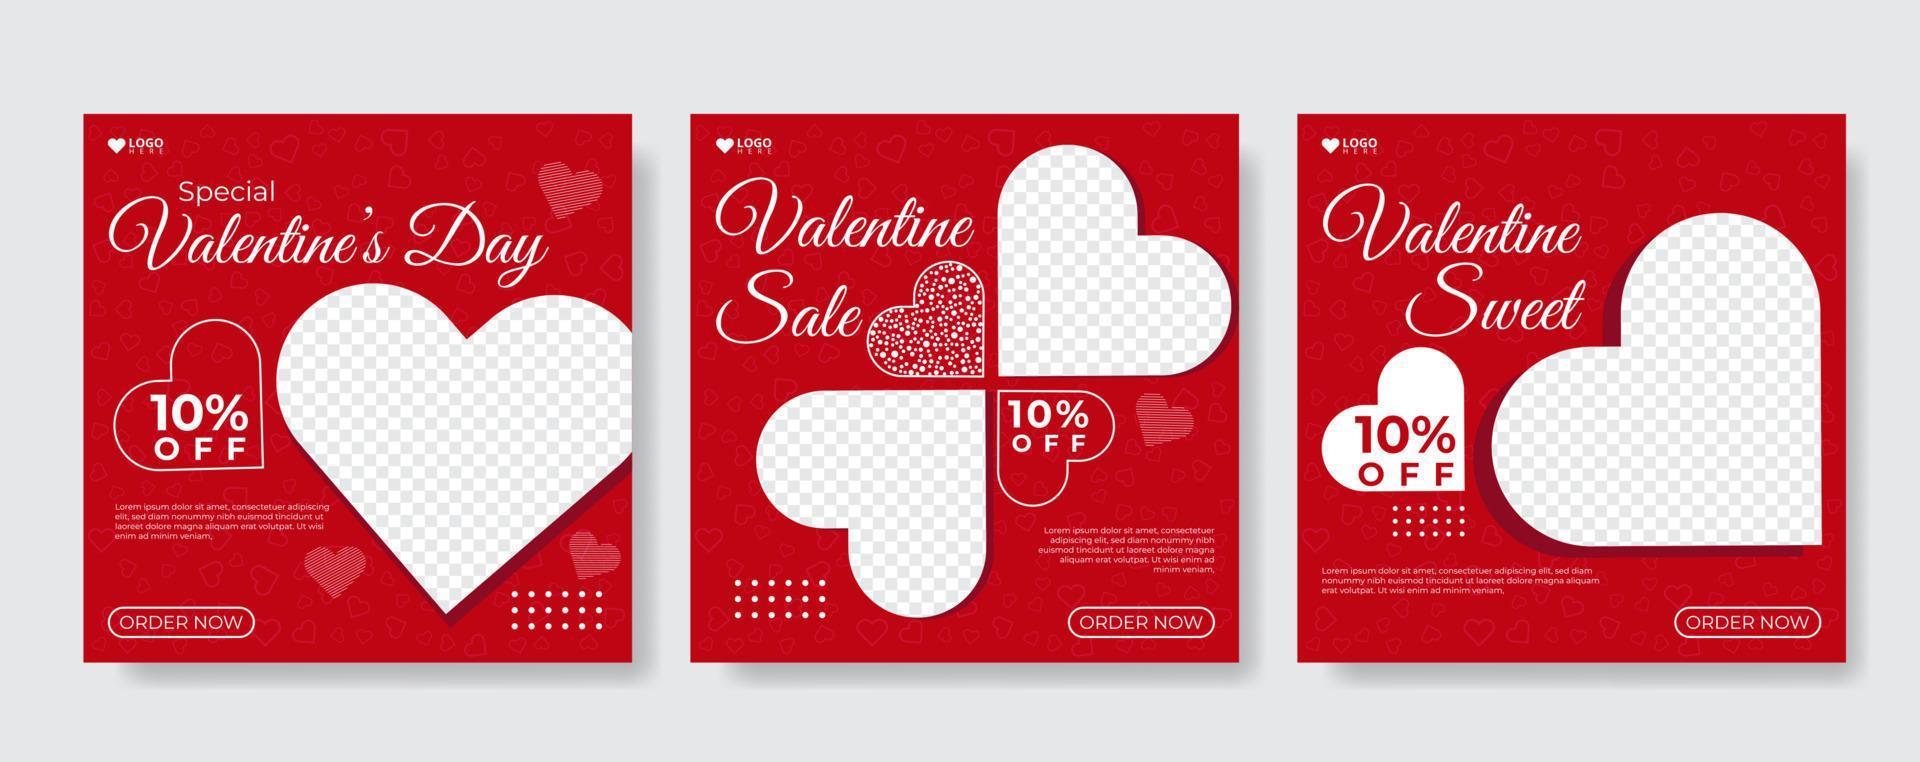 valentines day sale social media post template vector